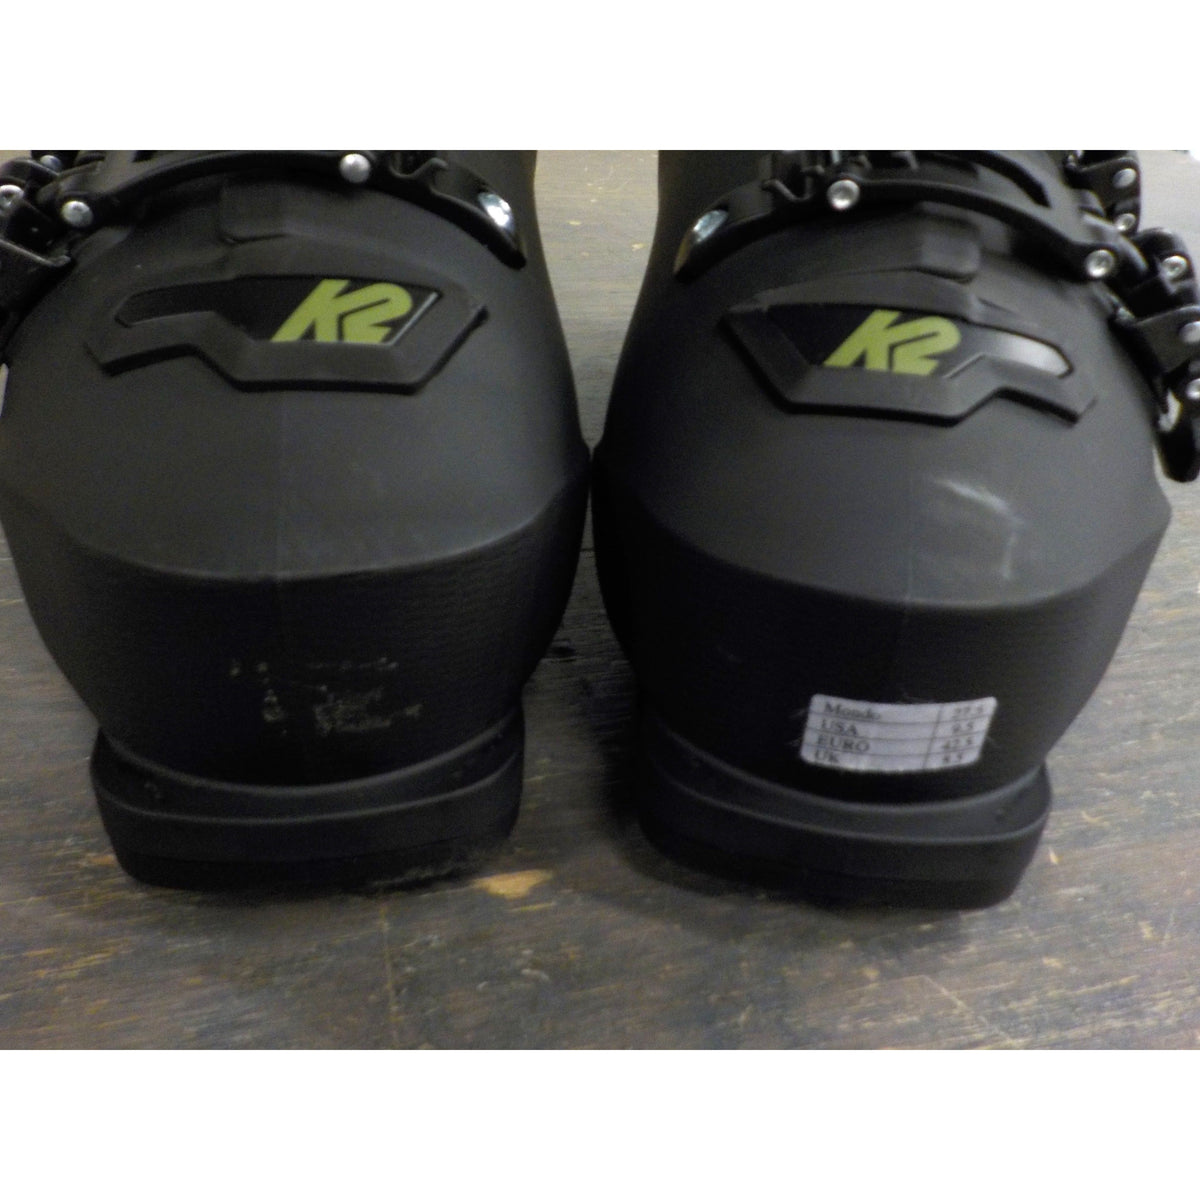 K2 BFC 90 Ski Boots - 27.5 - Used - Acceptable